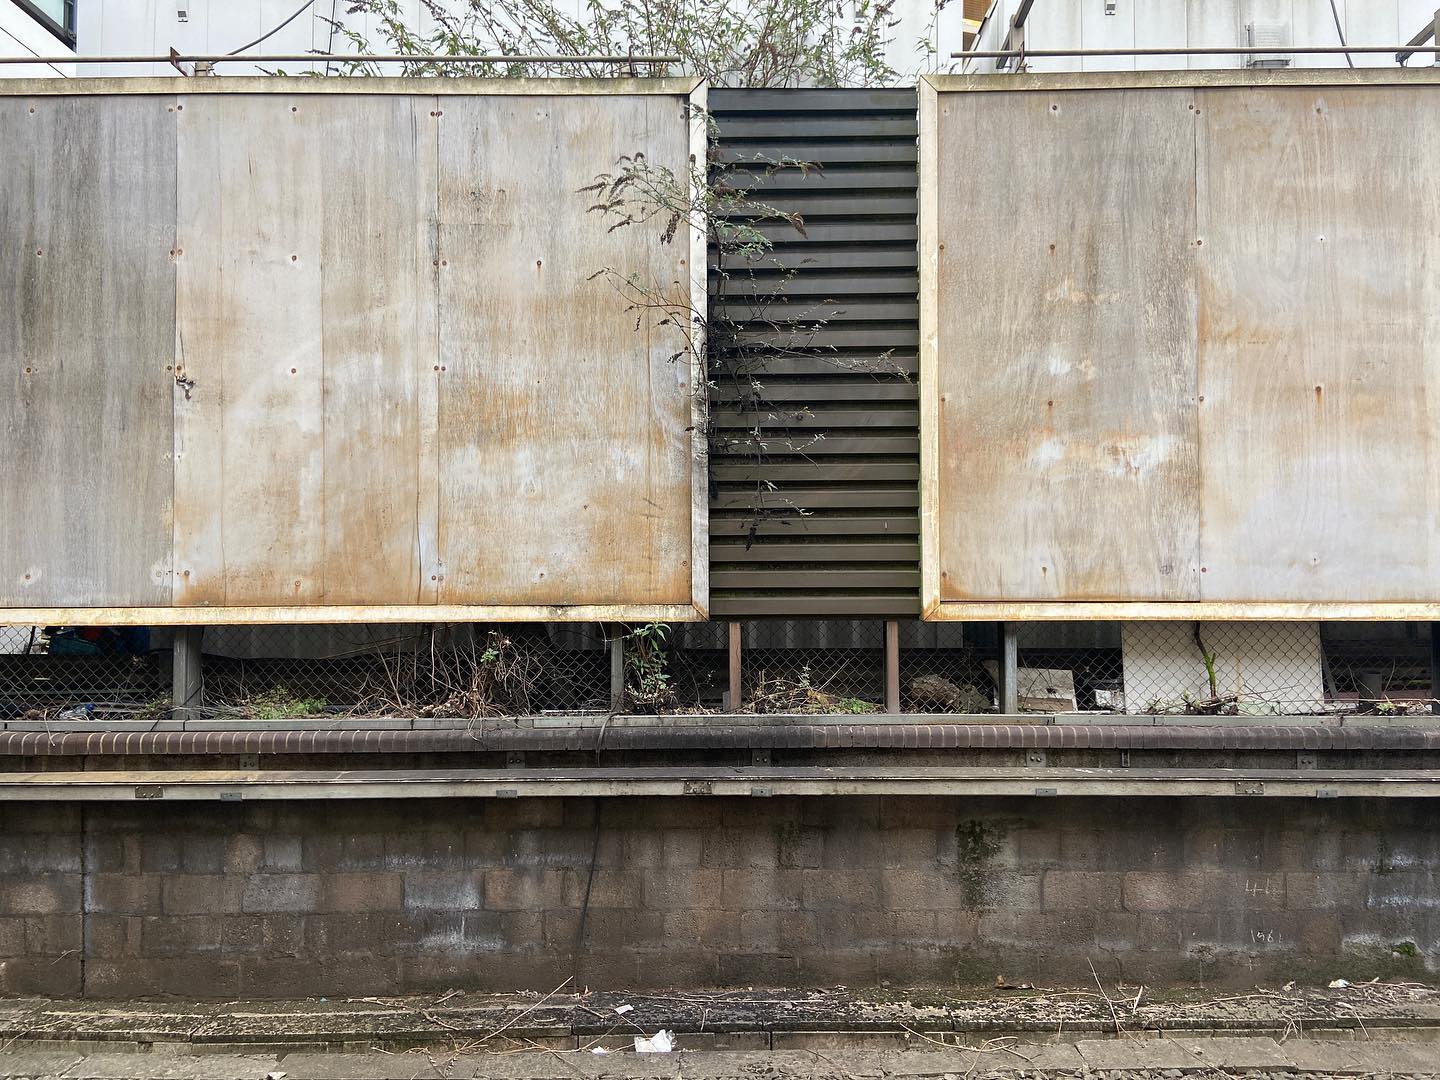 stripped billboards shout nothing loudly across railway line